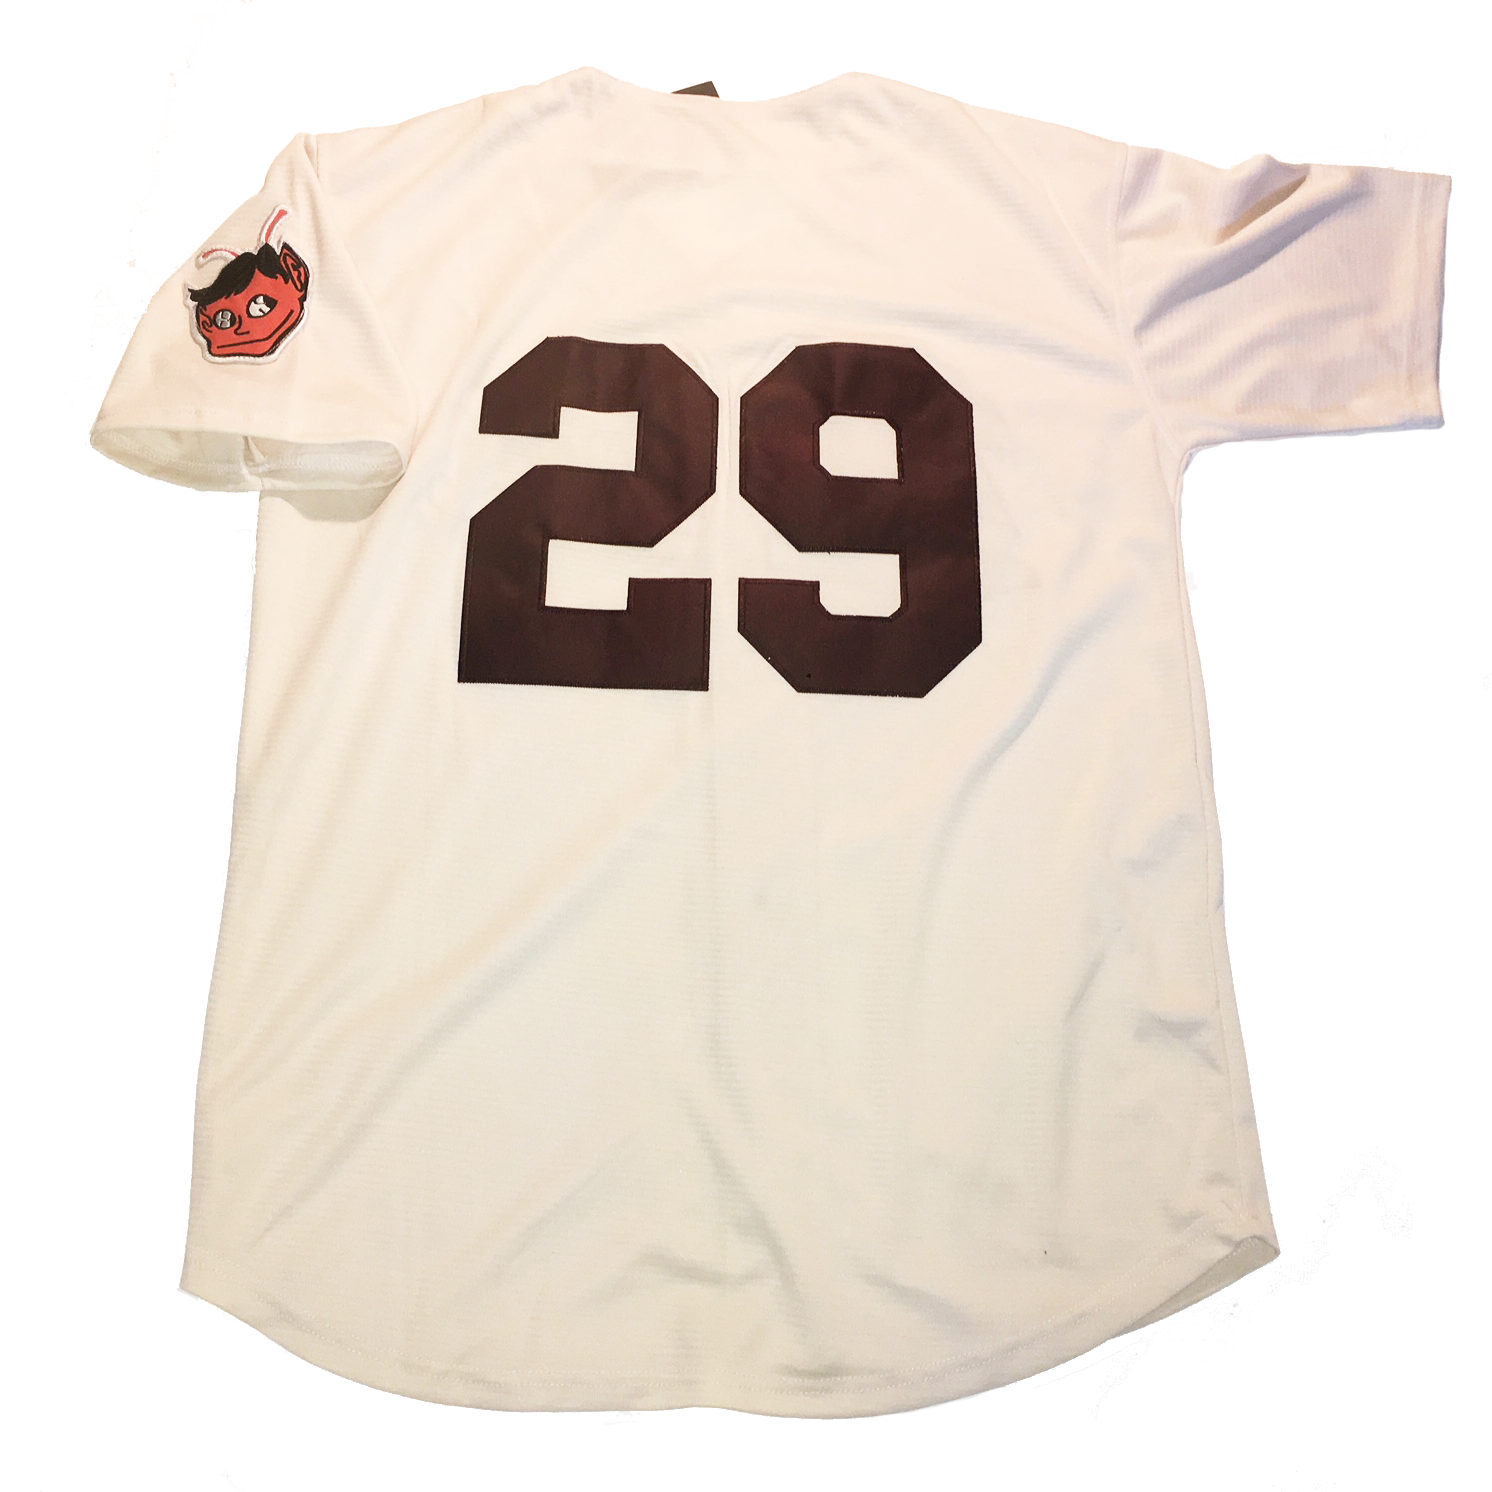 St Louis Browns Jersey, Large / Cream (1953)